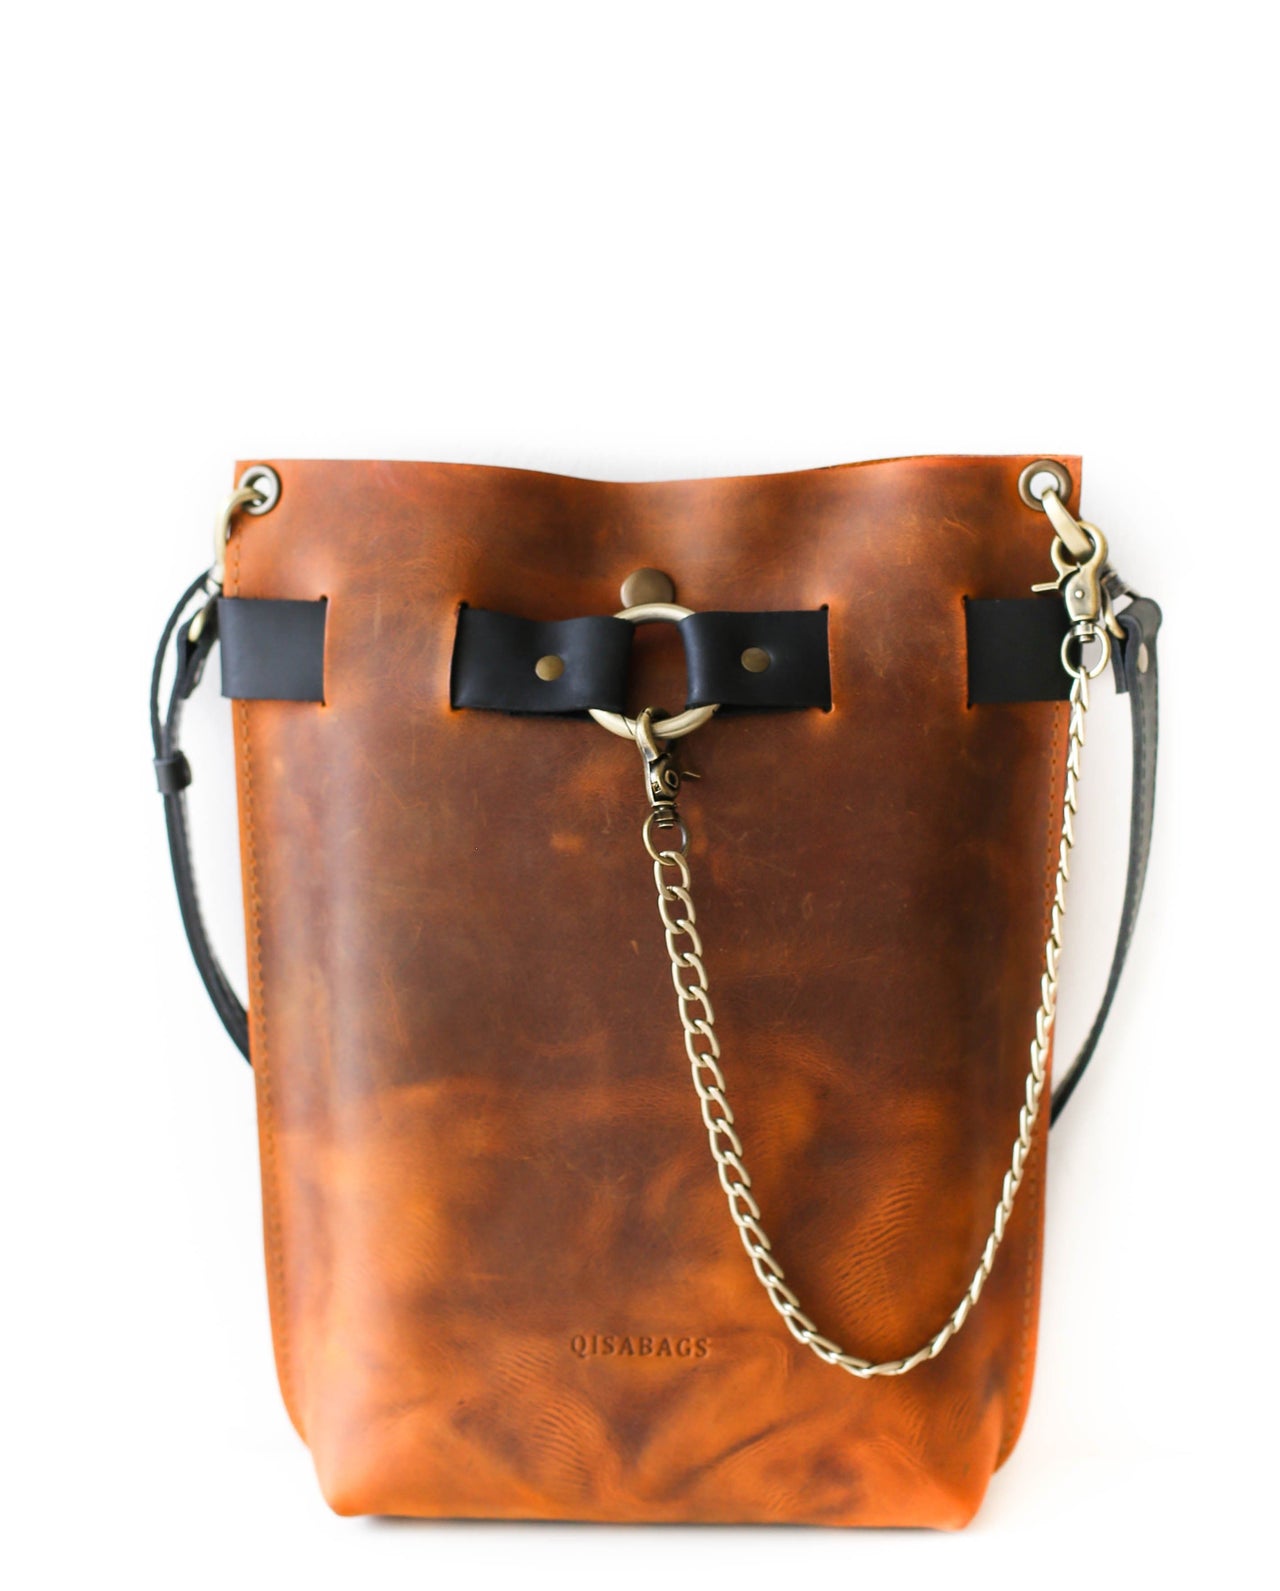 Brown Leather Backpack Purse